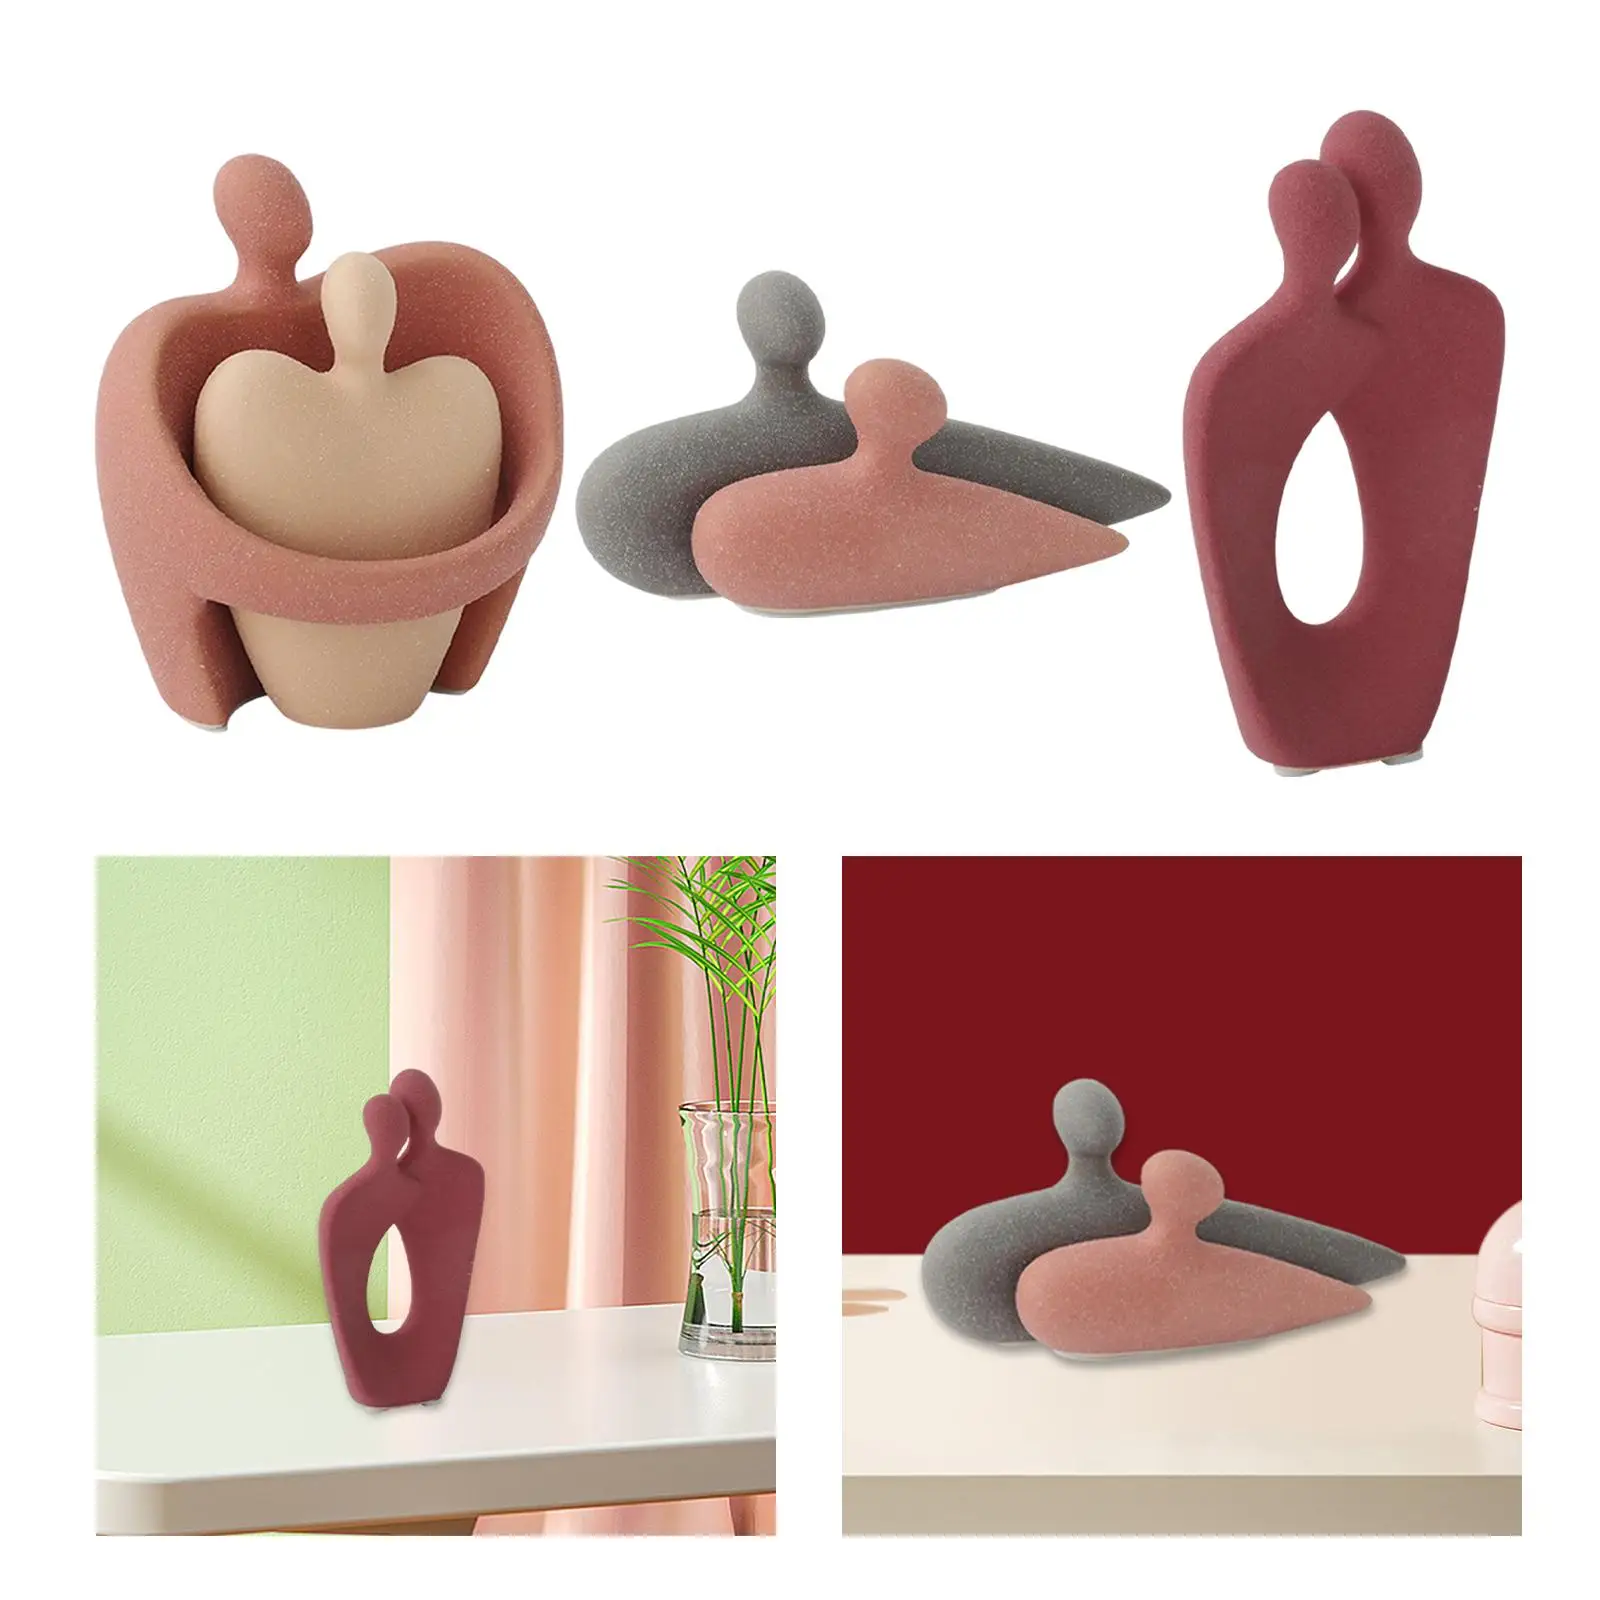 Couples Statue Sculpture Simple Decoration Desktop Meaningful Appearance Figurines for Bedside Valentine Day Present Home Office